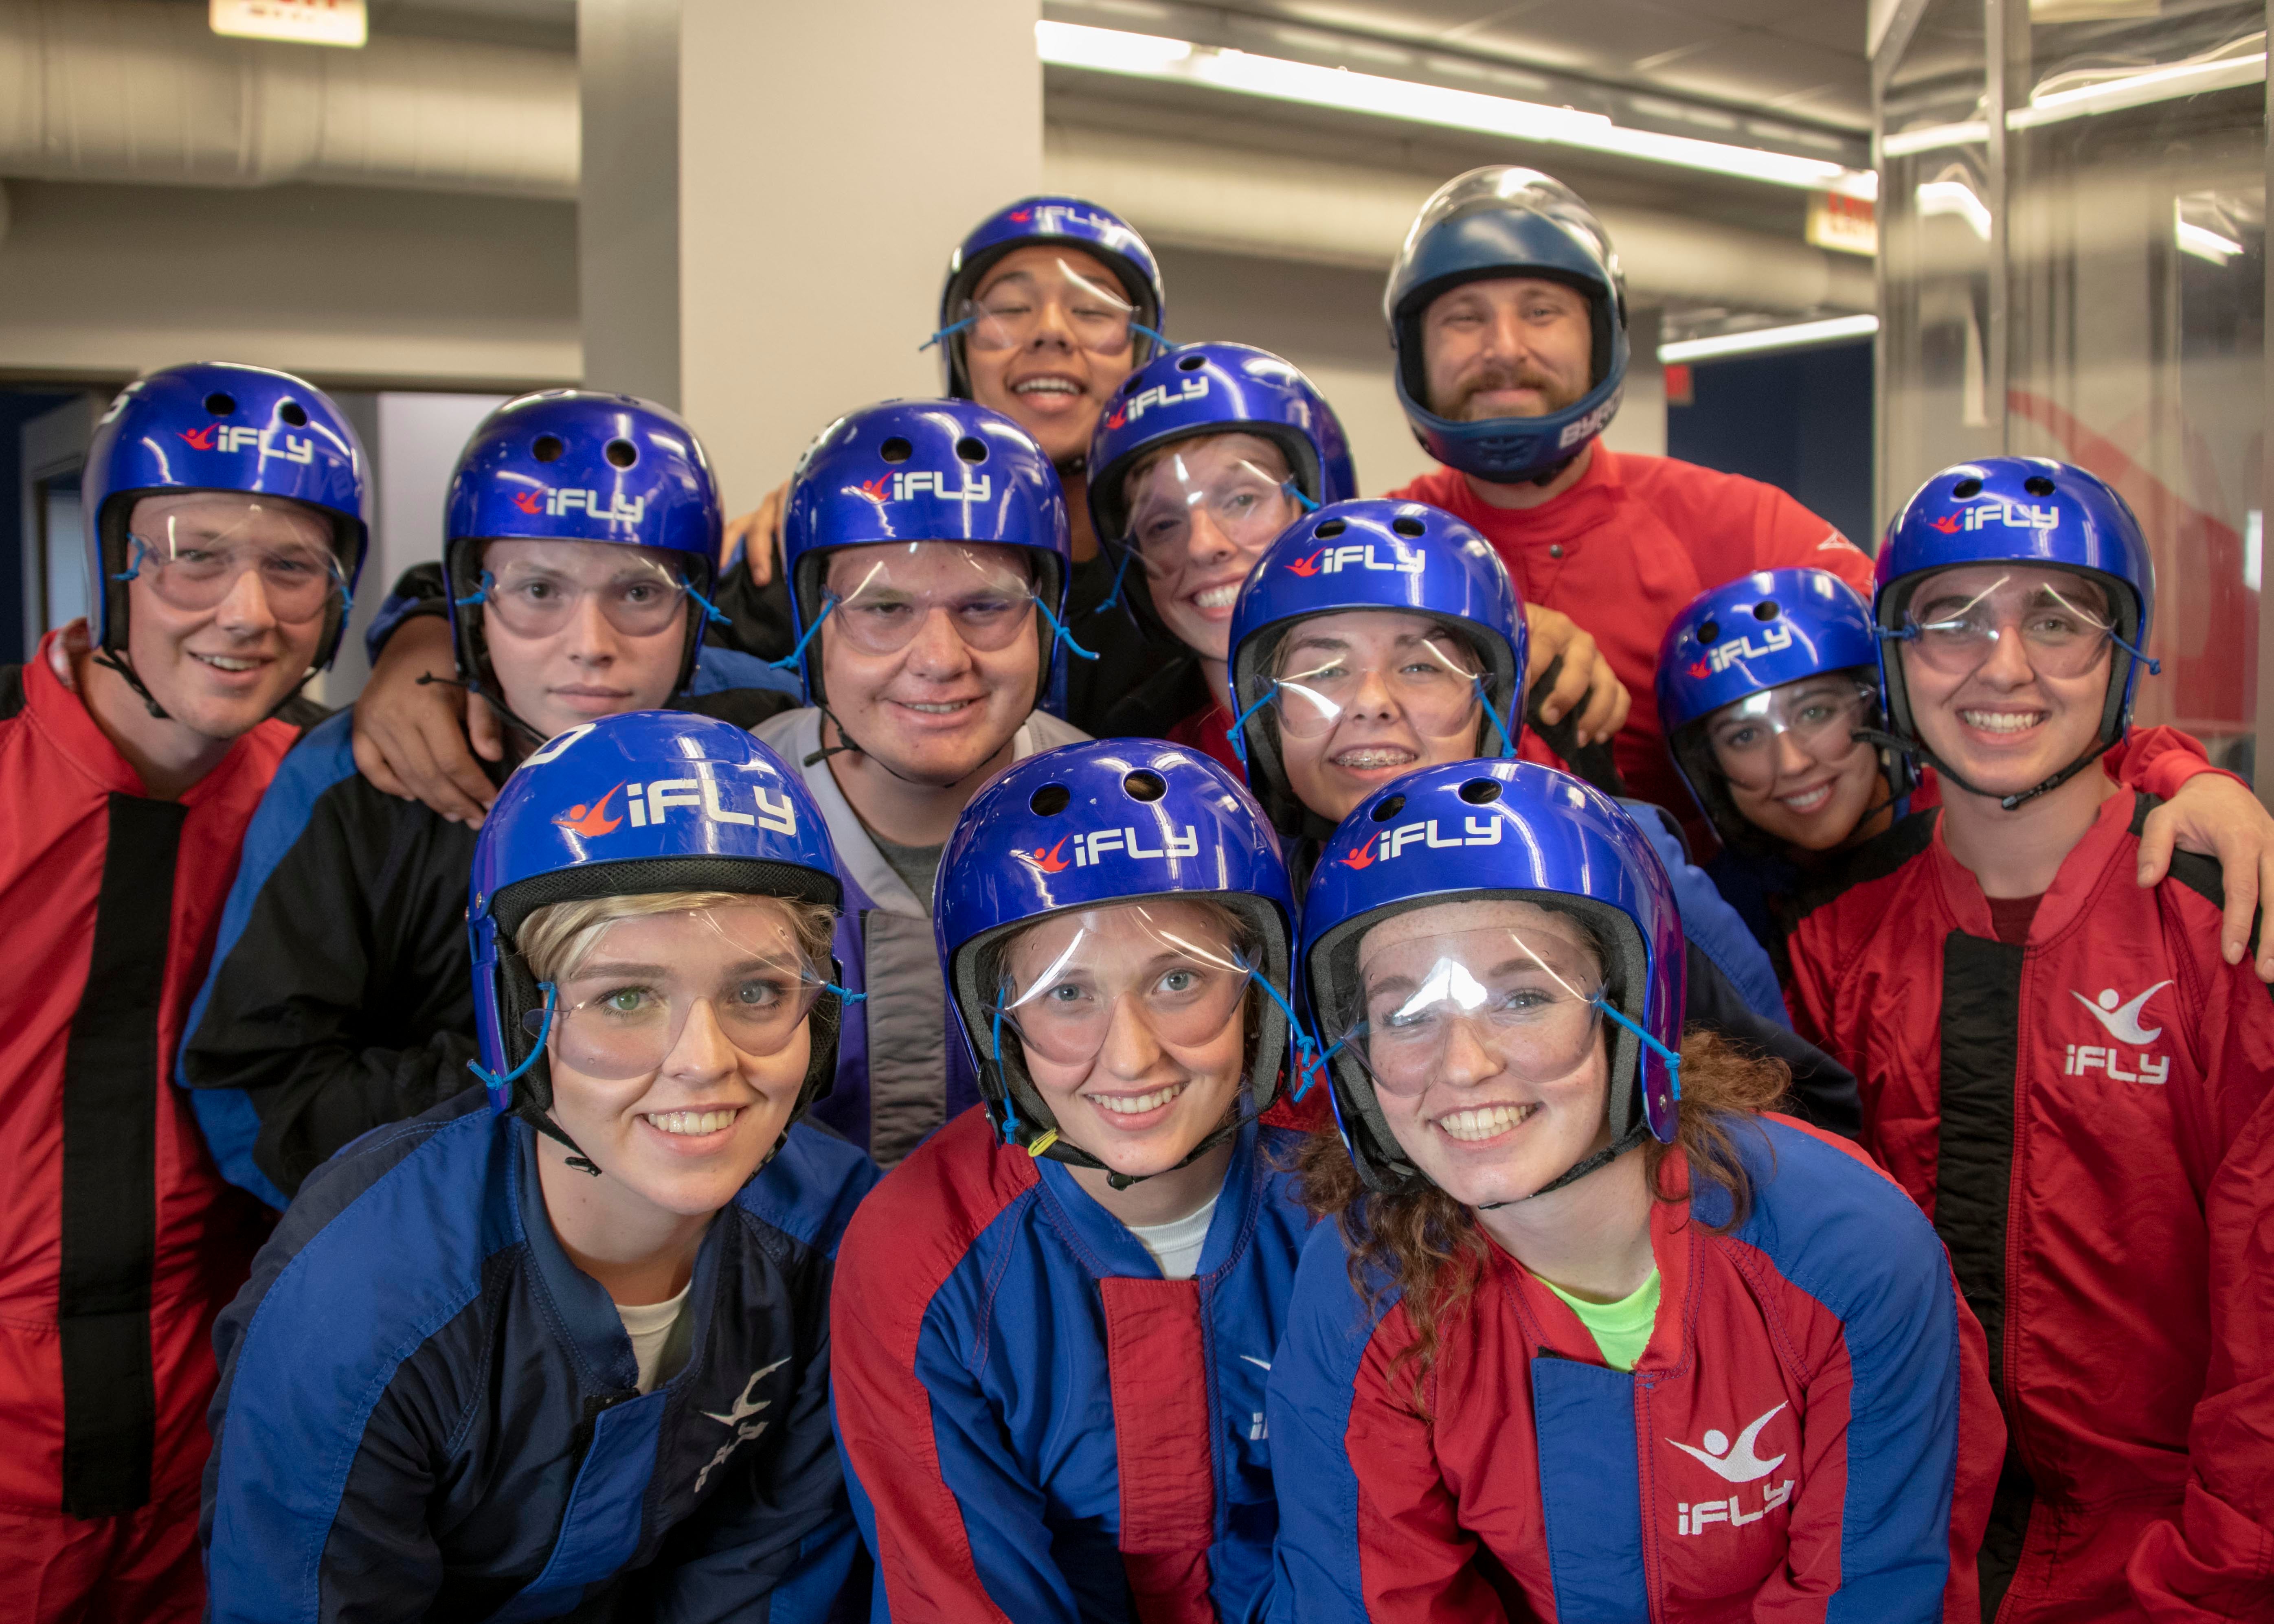 Group photo at iFly with everyone in flight suits and helmets